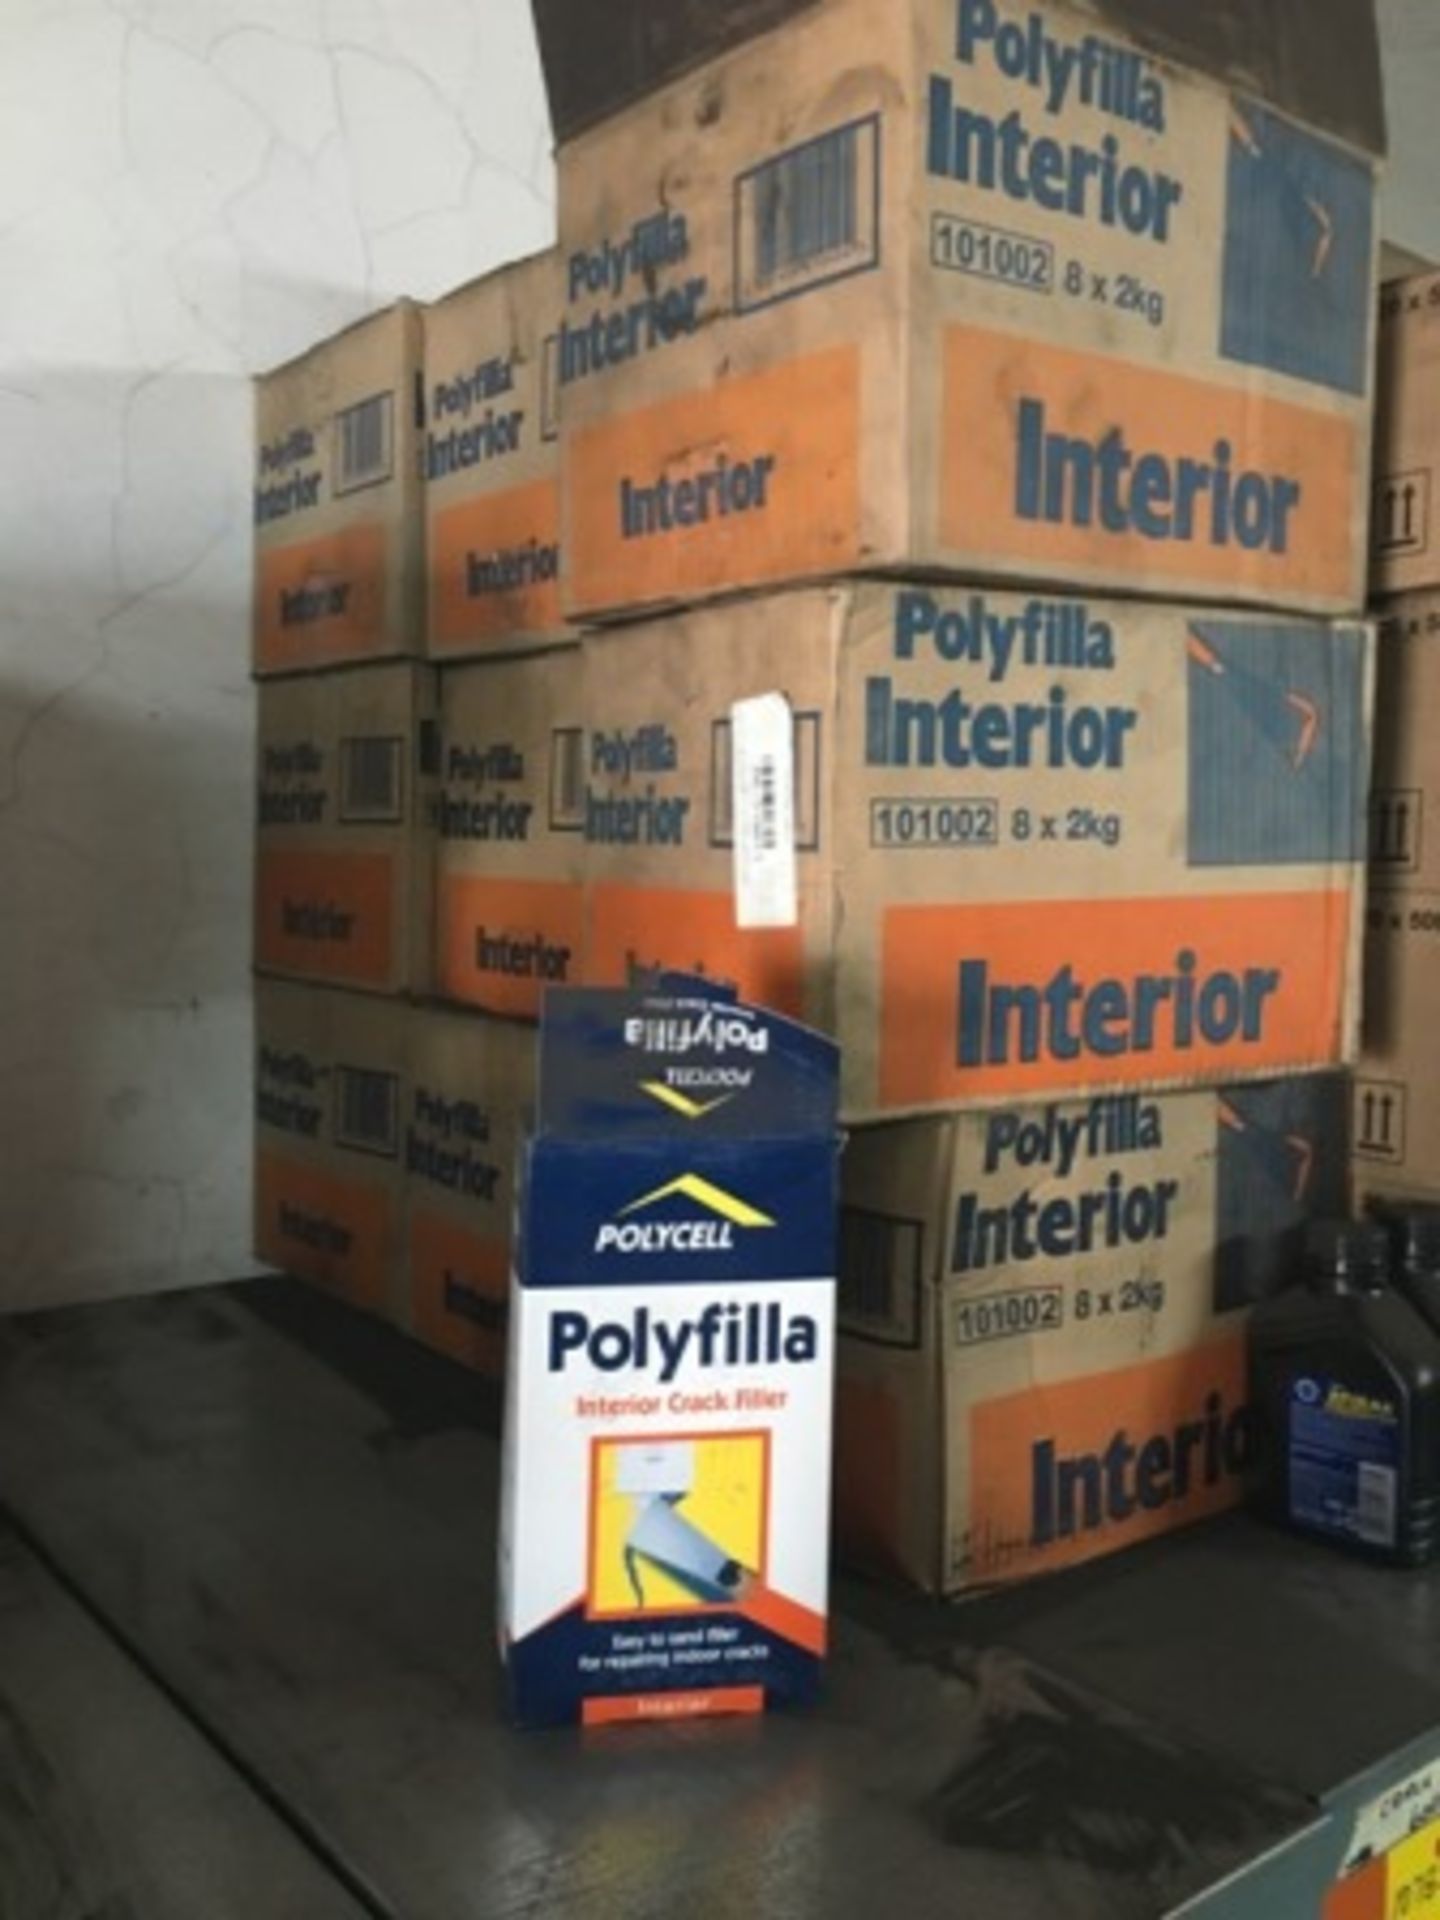 9 X BOXES POLLYFILLA INTERIOR CRACK FILLER - TO BE SOLD AS ONE LOT (MIDDELBURG, MPUMALANGA)